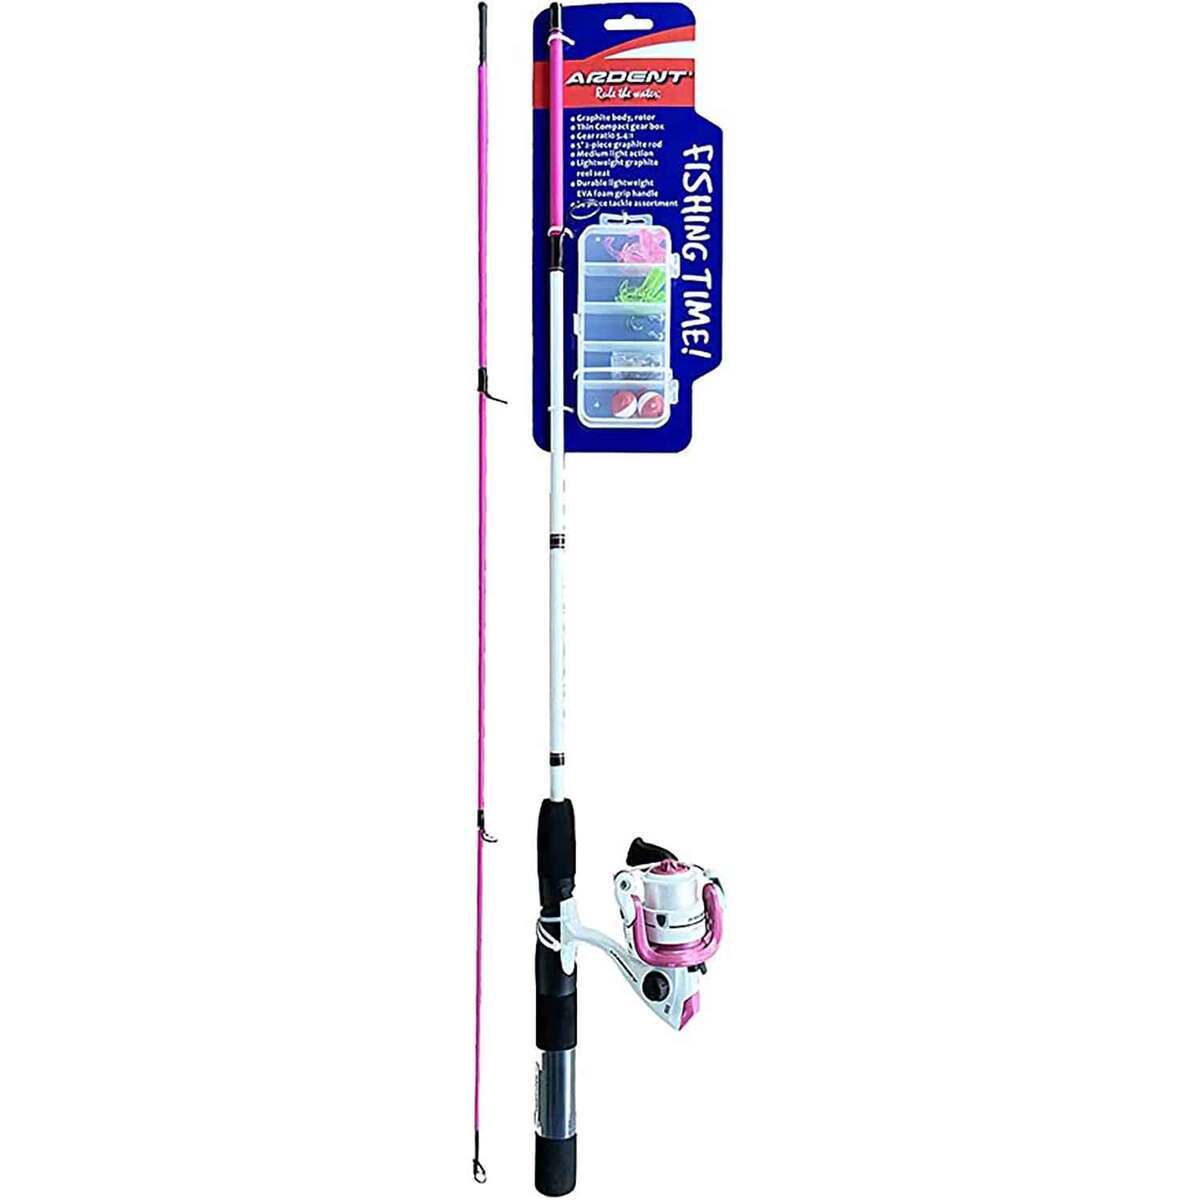 Ardent Fishing Time Kids Spinning Combo, Blue